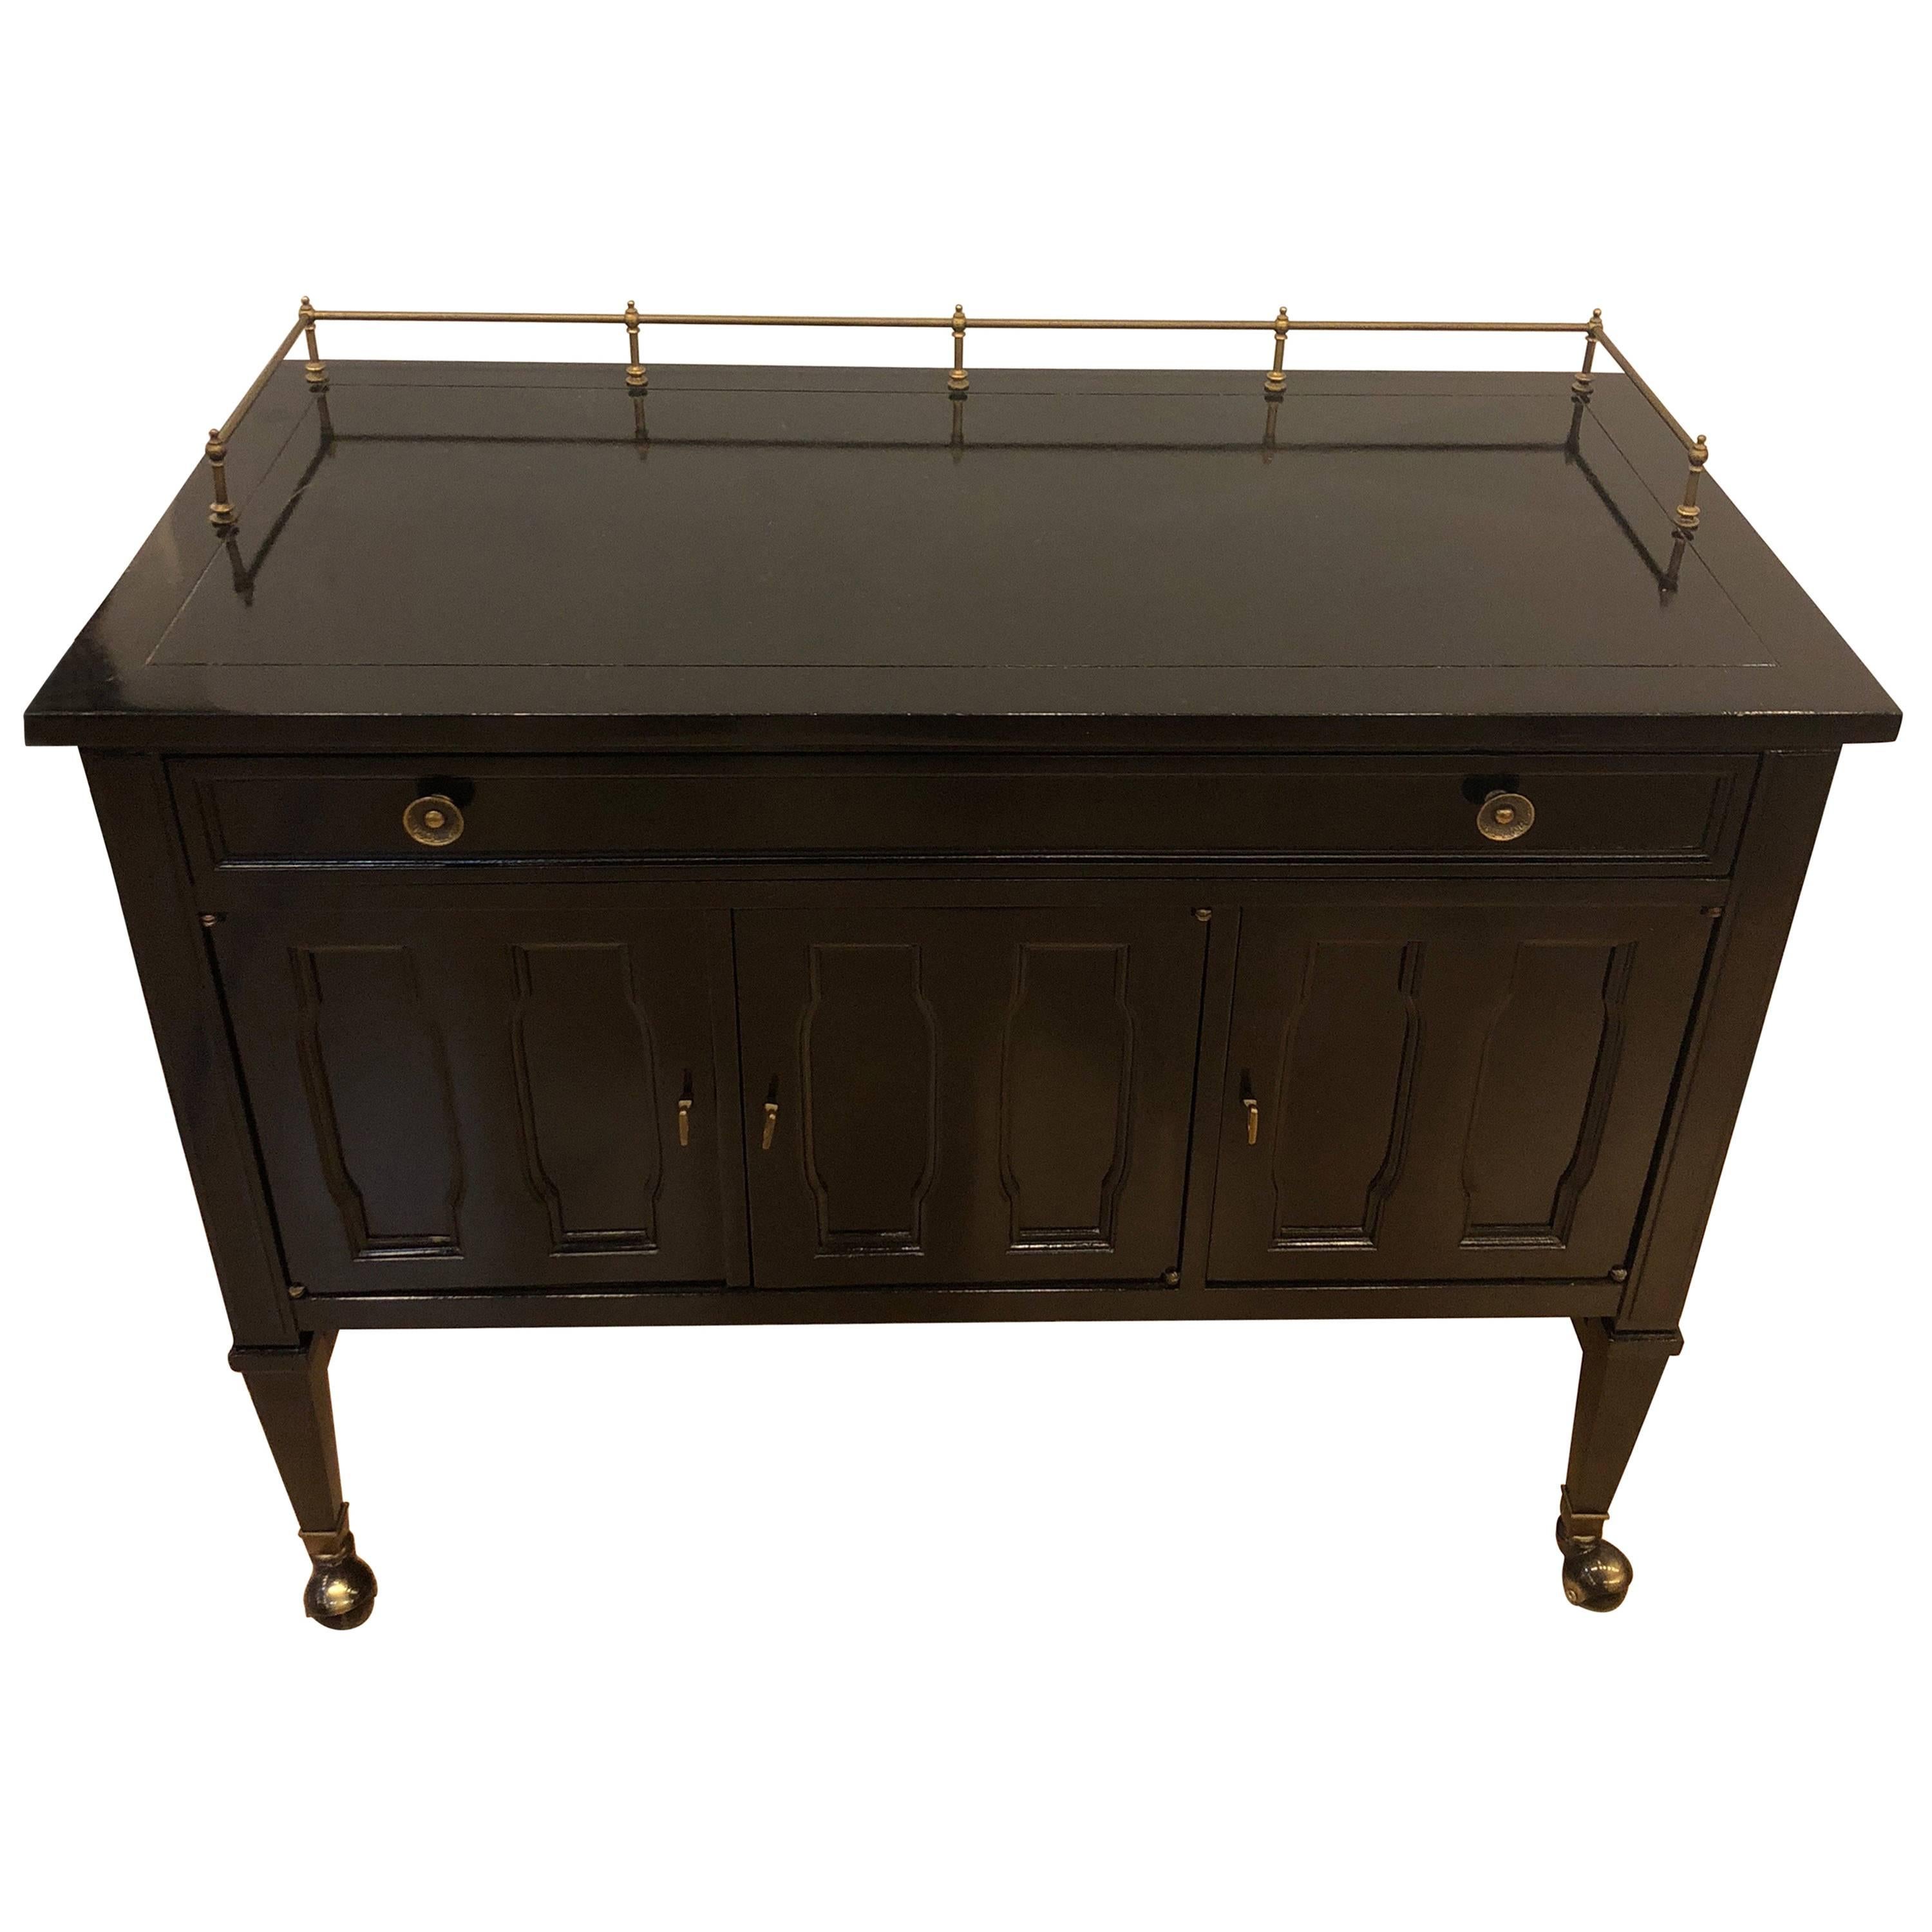 Drexel Black Lacquered Wheeled Barcart or Server